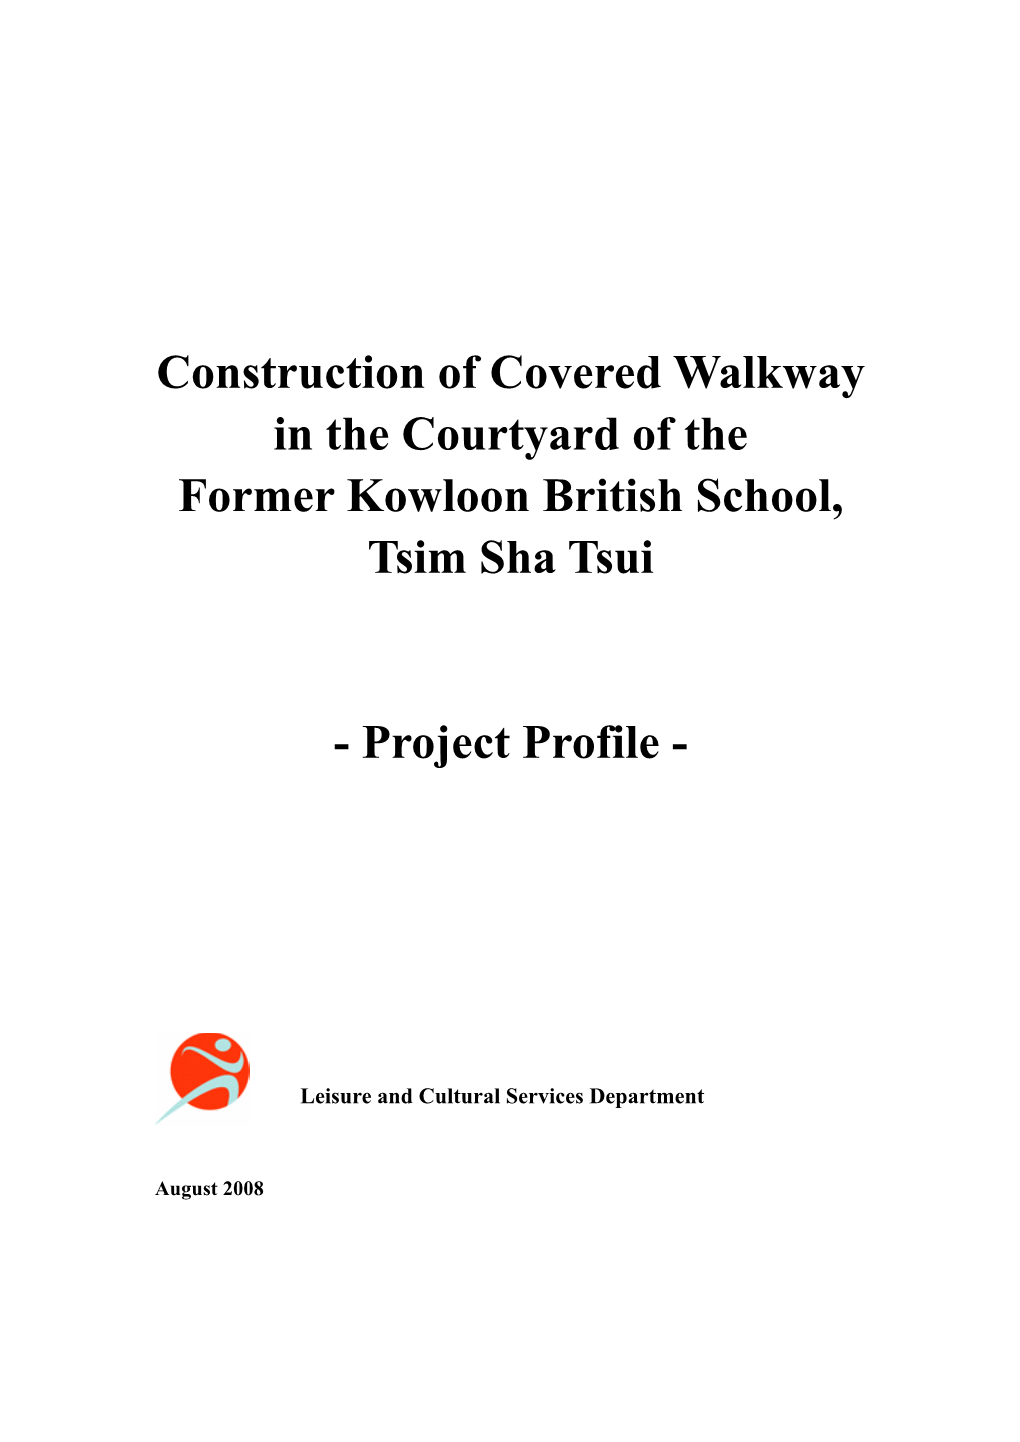 Construction of Covered Walkway in the Courtyard of the Former Kowloon British School, Tsim Sha Tsui